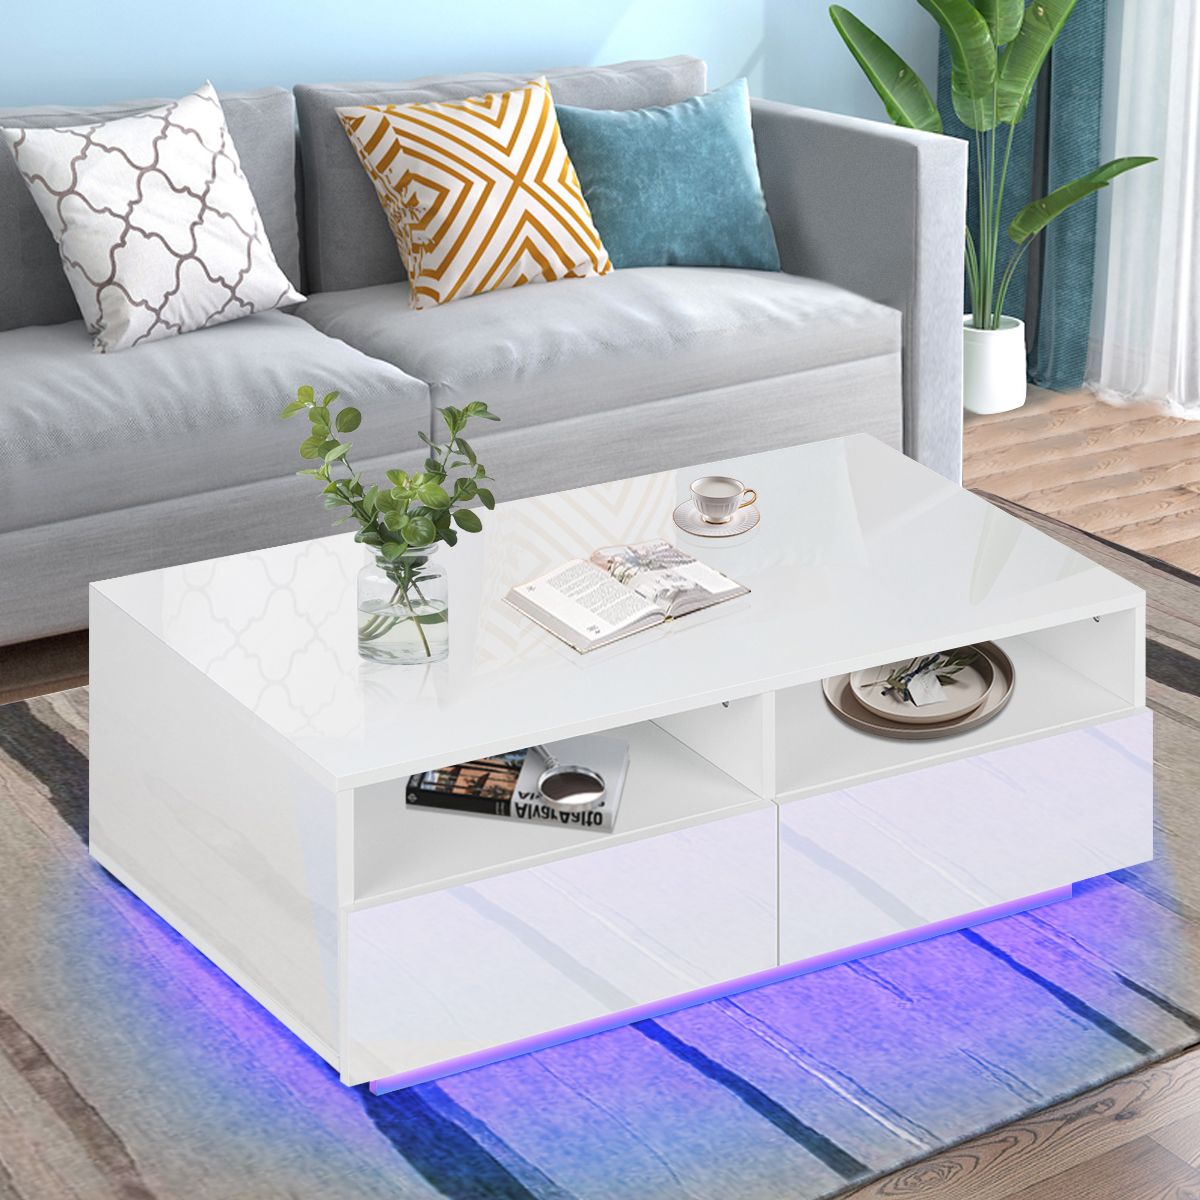 Hommpa High Gloss Led Coffee Table W/ 4 Drawers Living Room With Remote Inside Led Coffee Tables With 4 Drawers (Gallery 4 of 20)